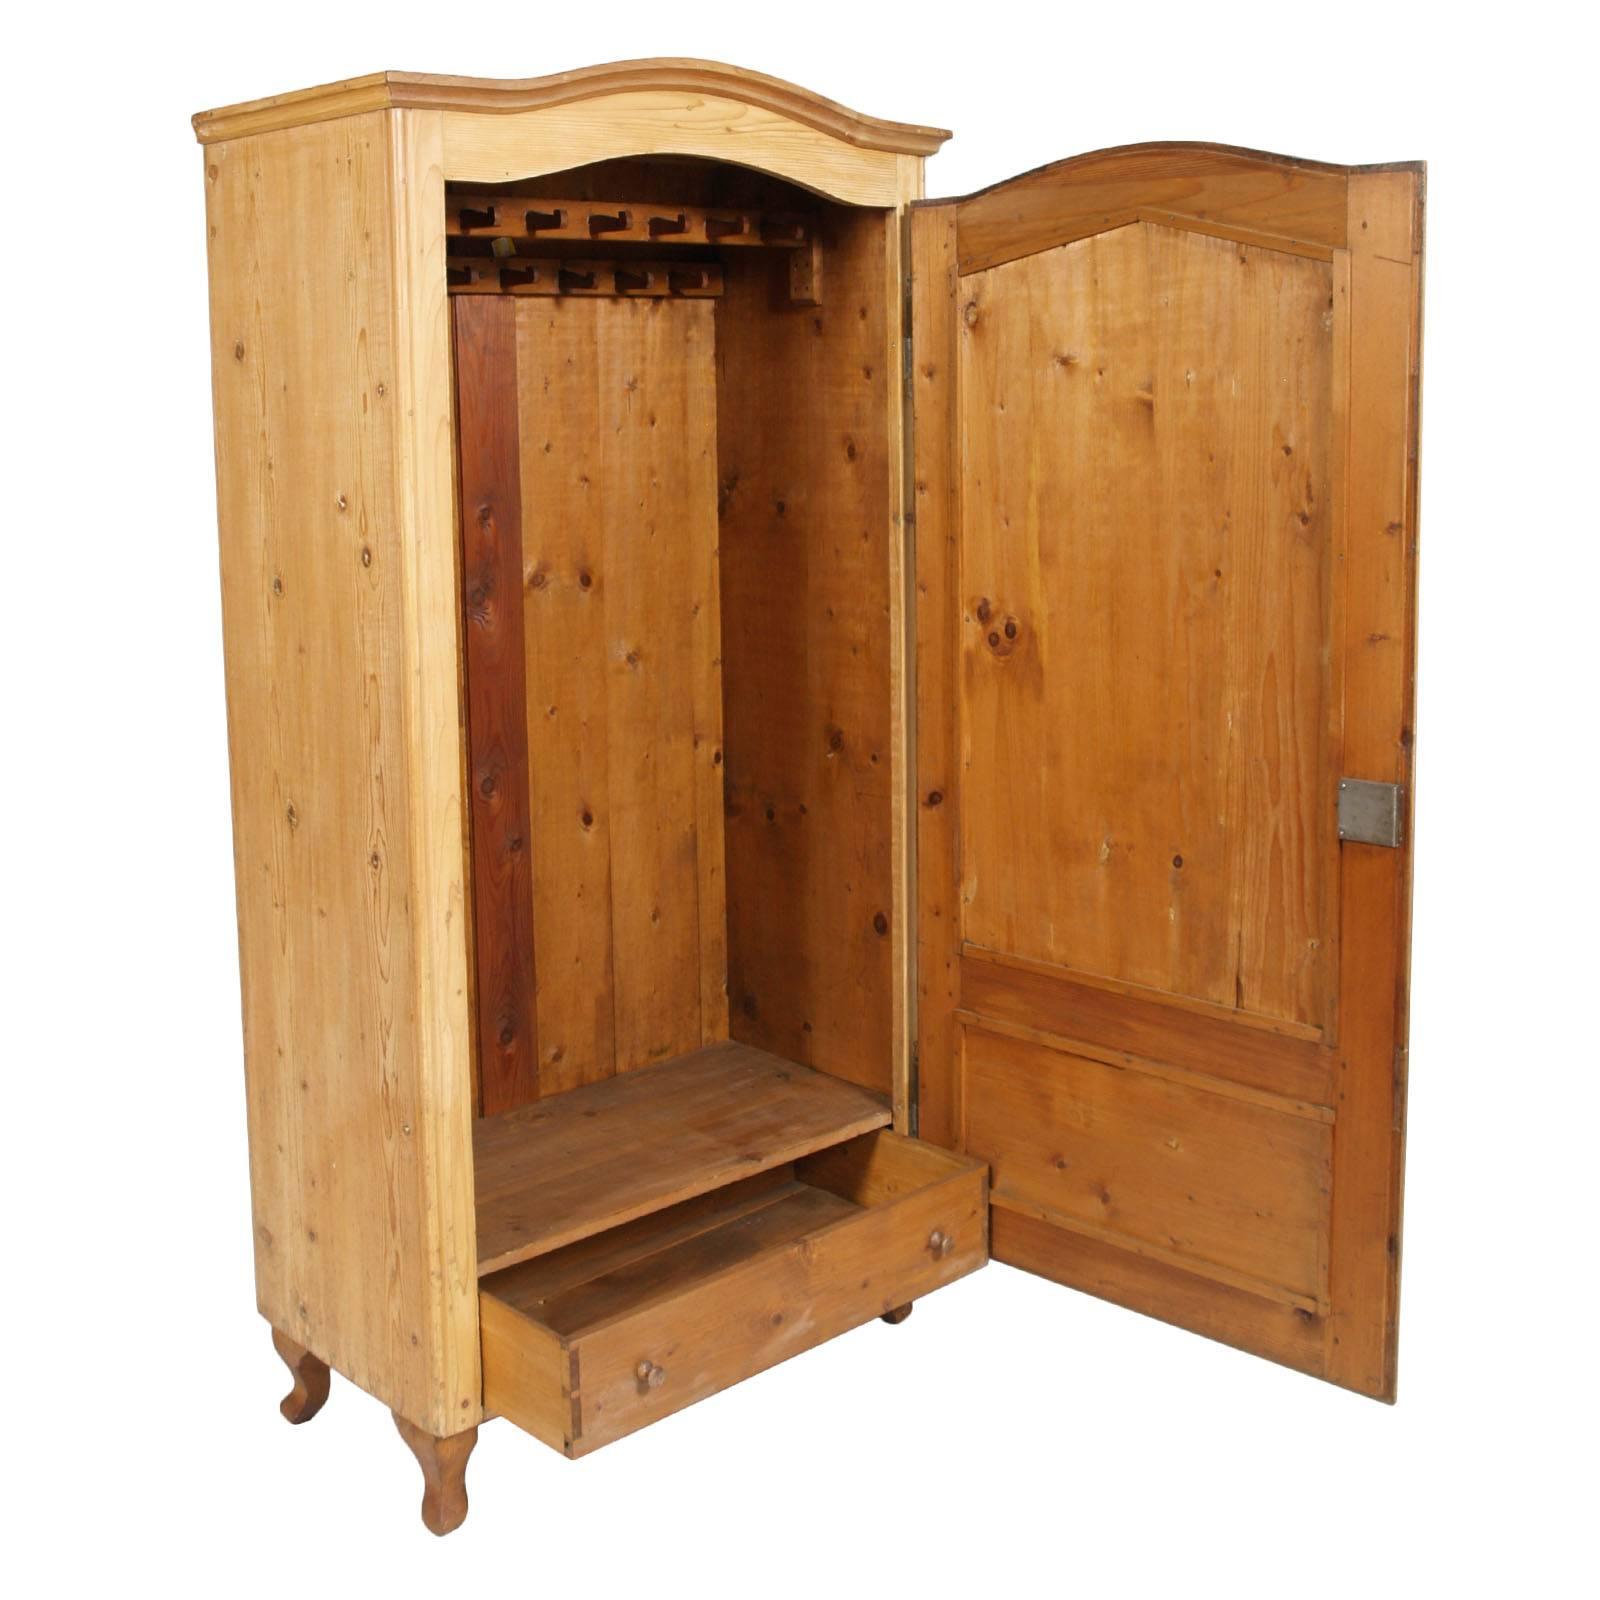 Antique  biedermeier wardrobe armoire cupboard in solid wood. All in whitened solid larch the external part and walnut-colored internal parts and legs
The legs, are in walnut, all the other pieces in larch.
The aesthetic result is very